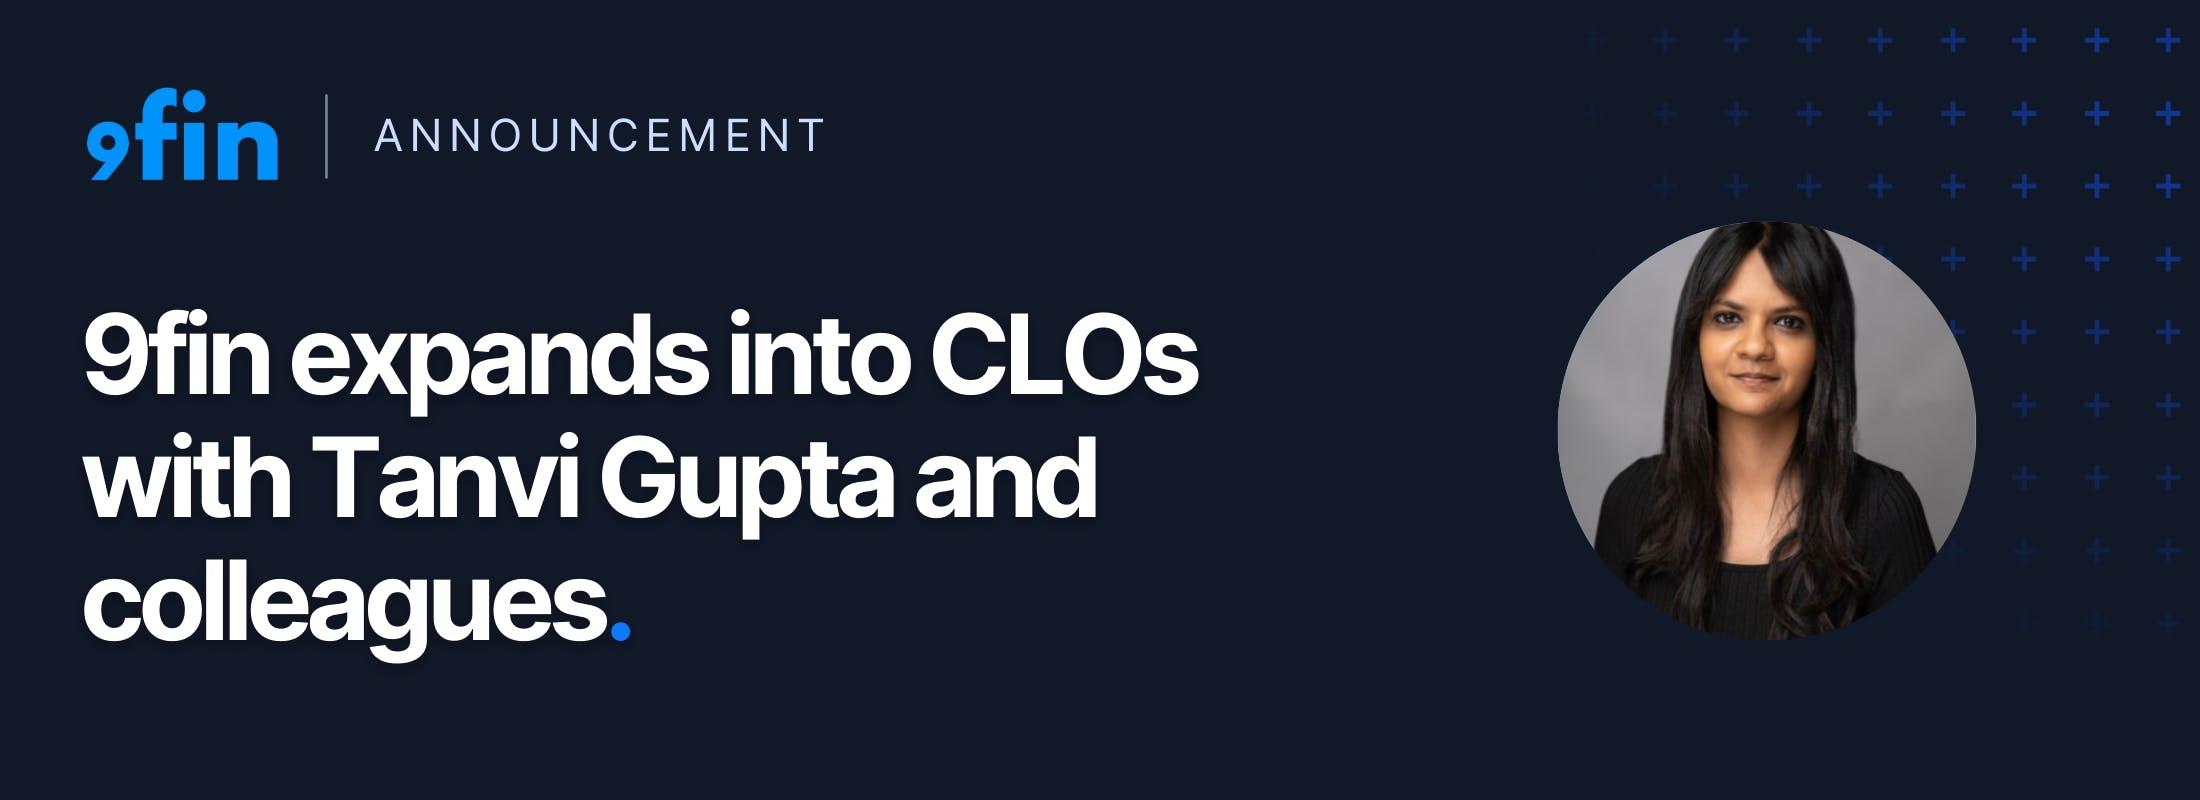 9fin expands into CLOs with Tanvi Gupta and colleagues